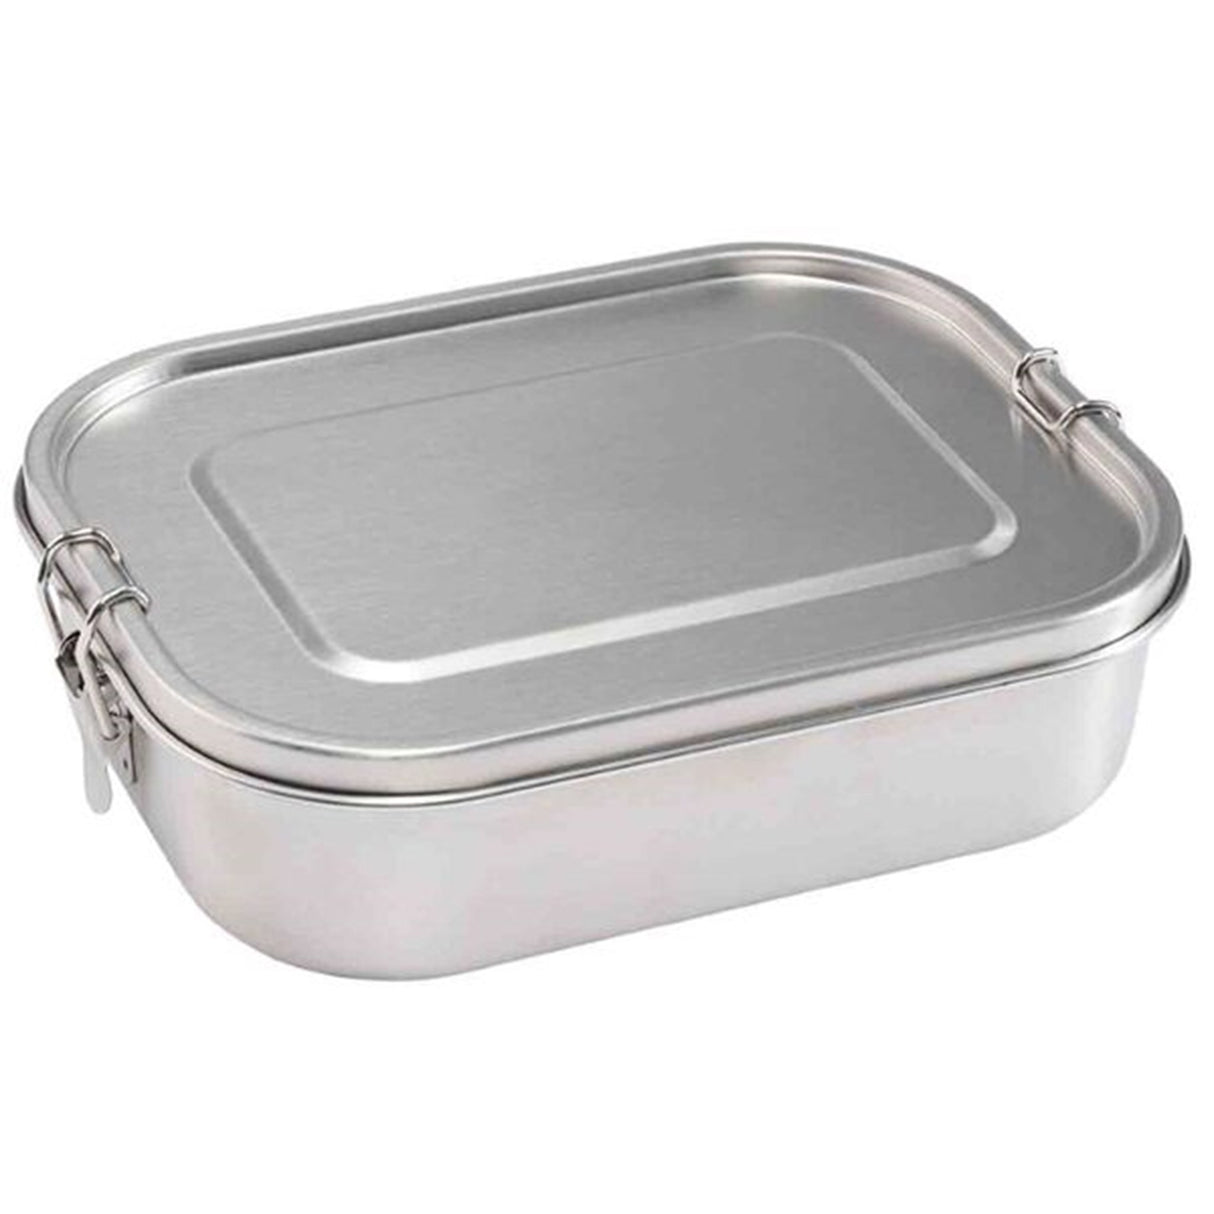 Haps Nordic Lunchbox Large Steel